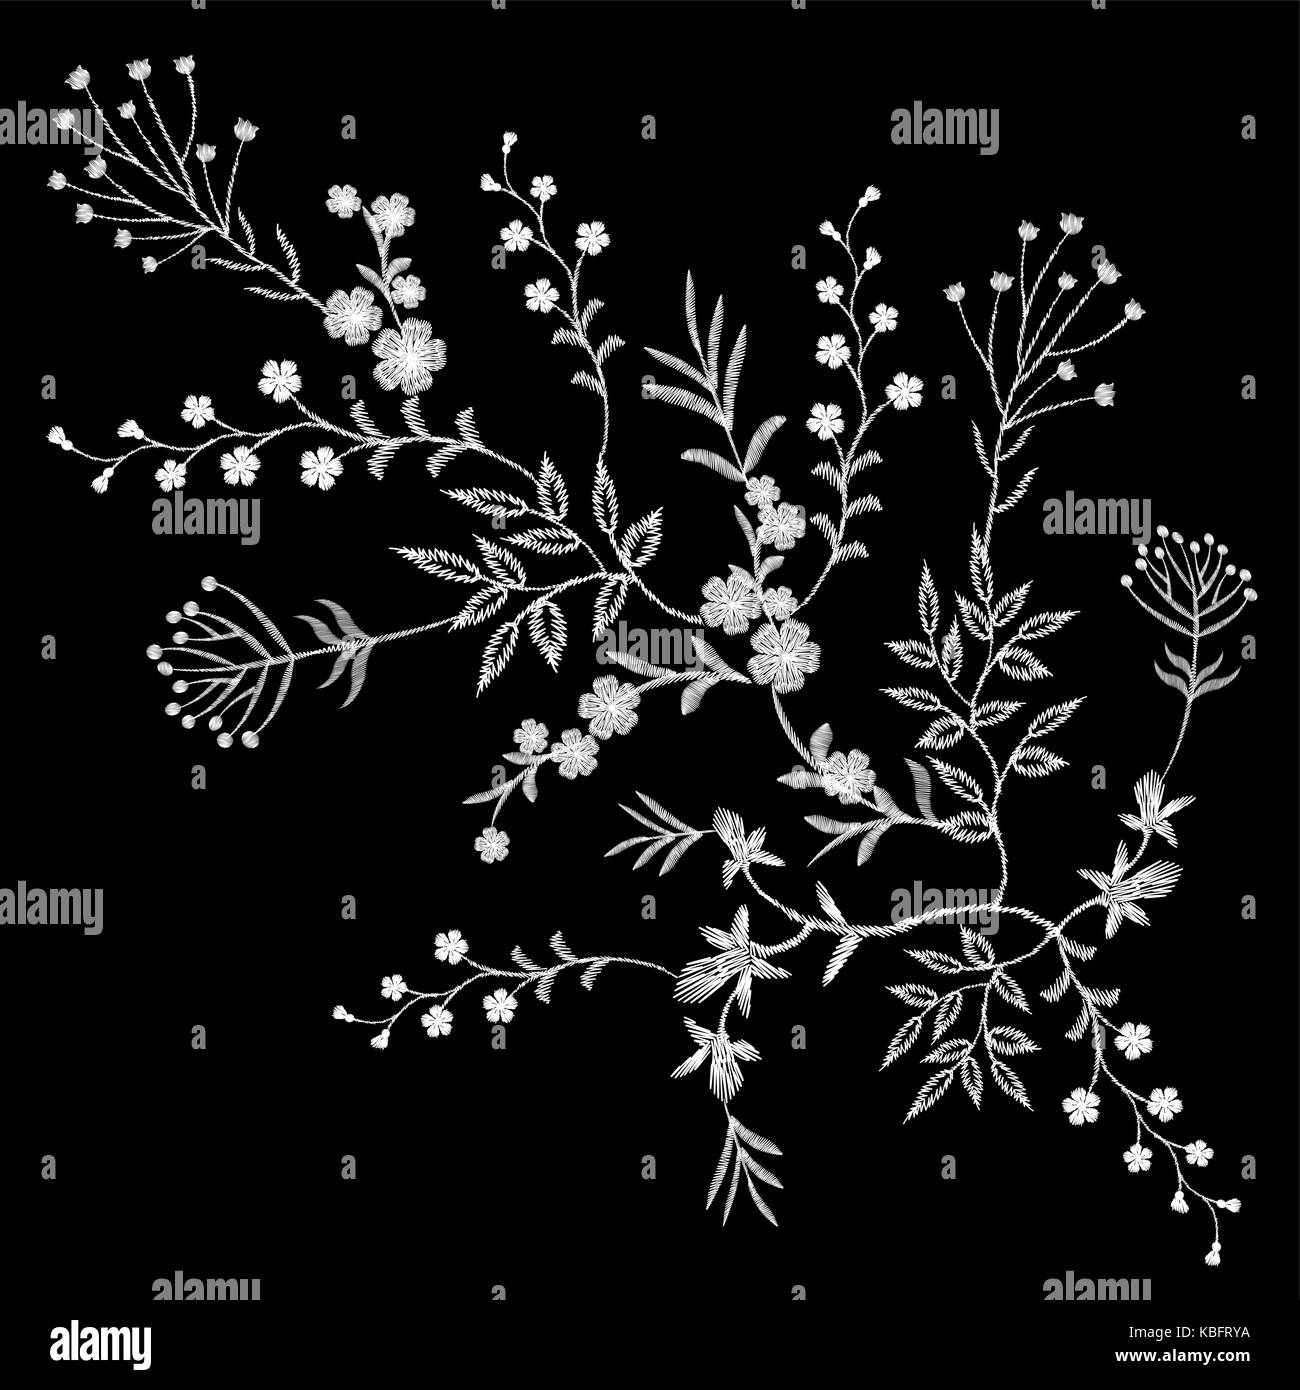 Embroidery white lace floral pattern small branches wild herb with little blue violet field flower. Ornate traditional folk fashion patch design black Stock Vector